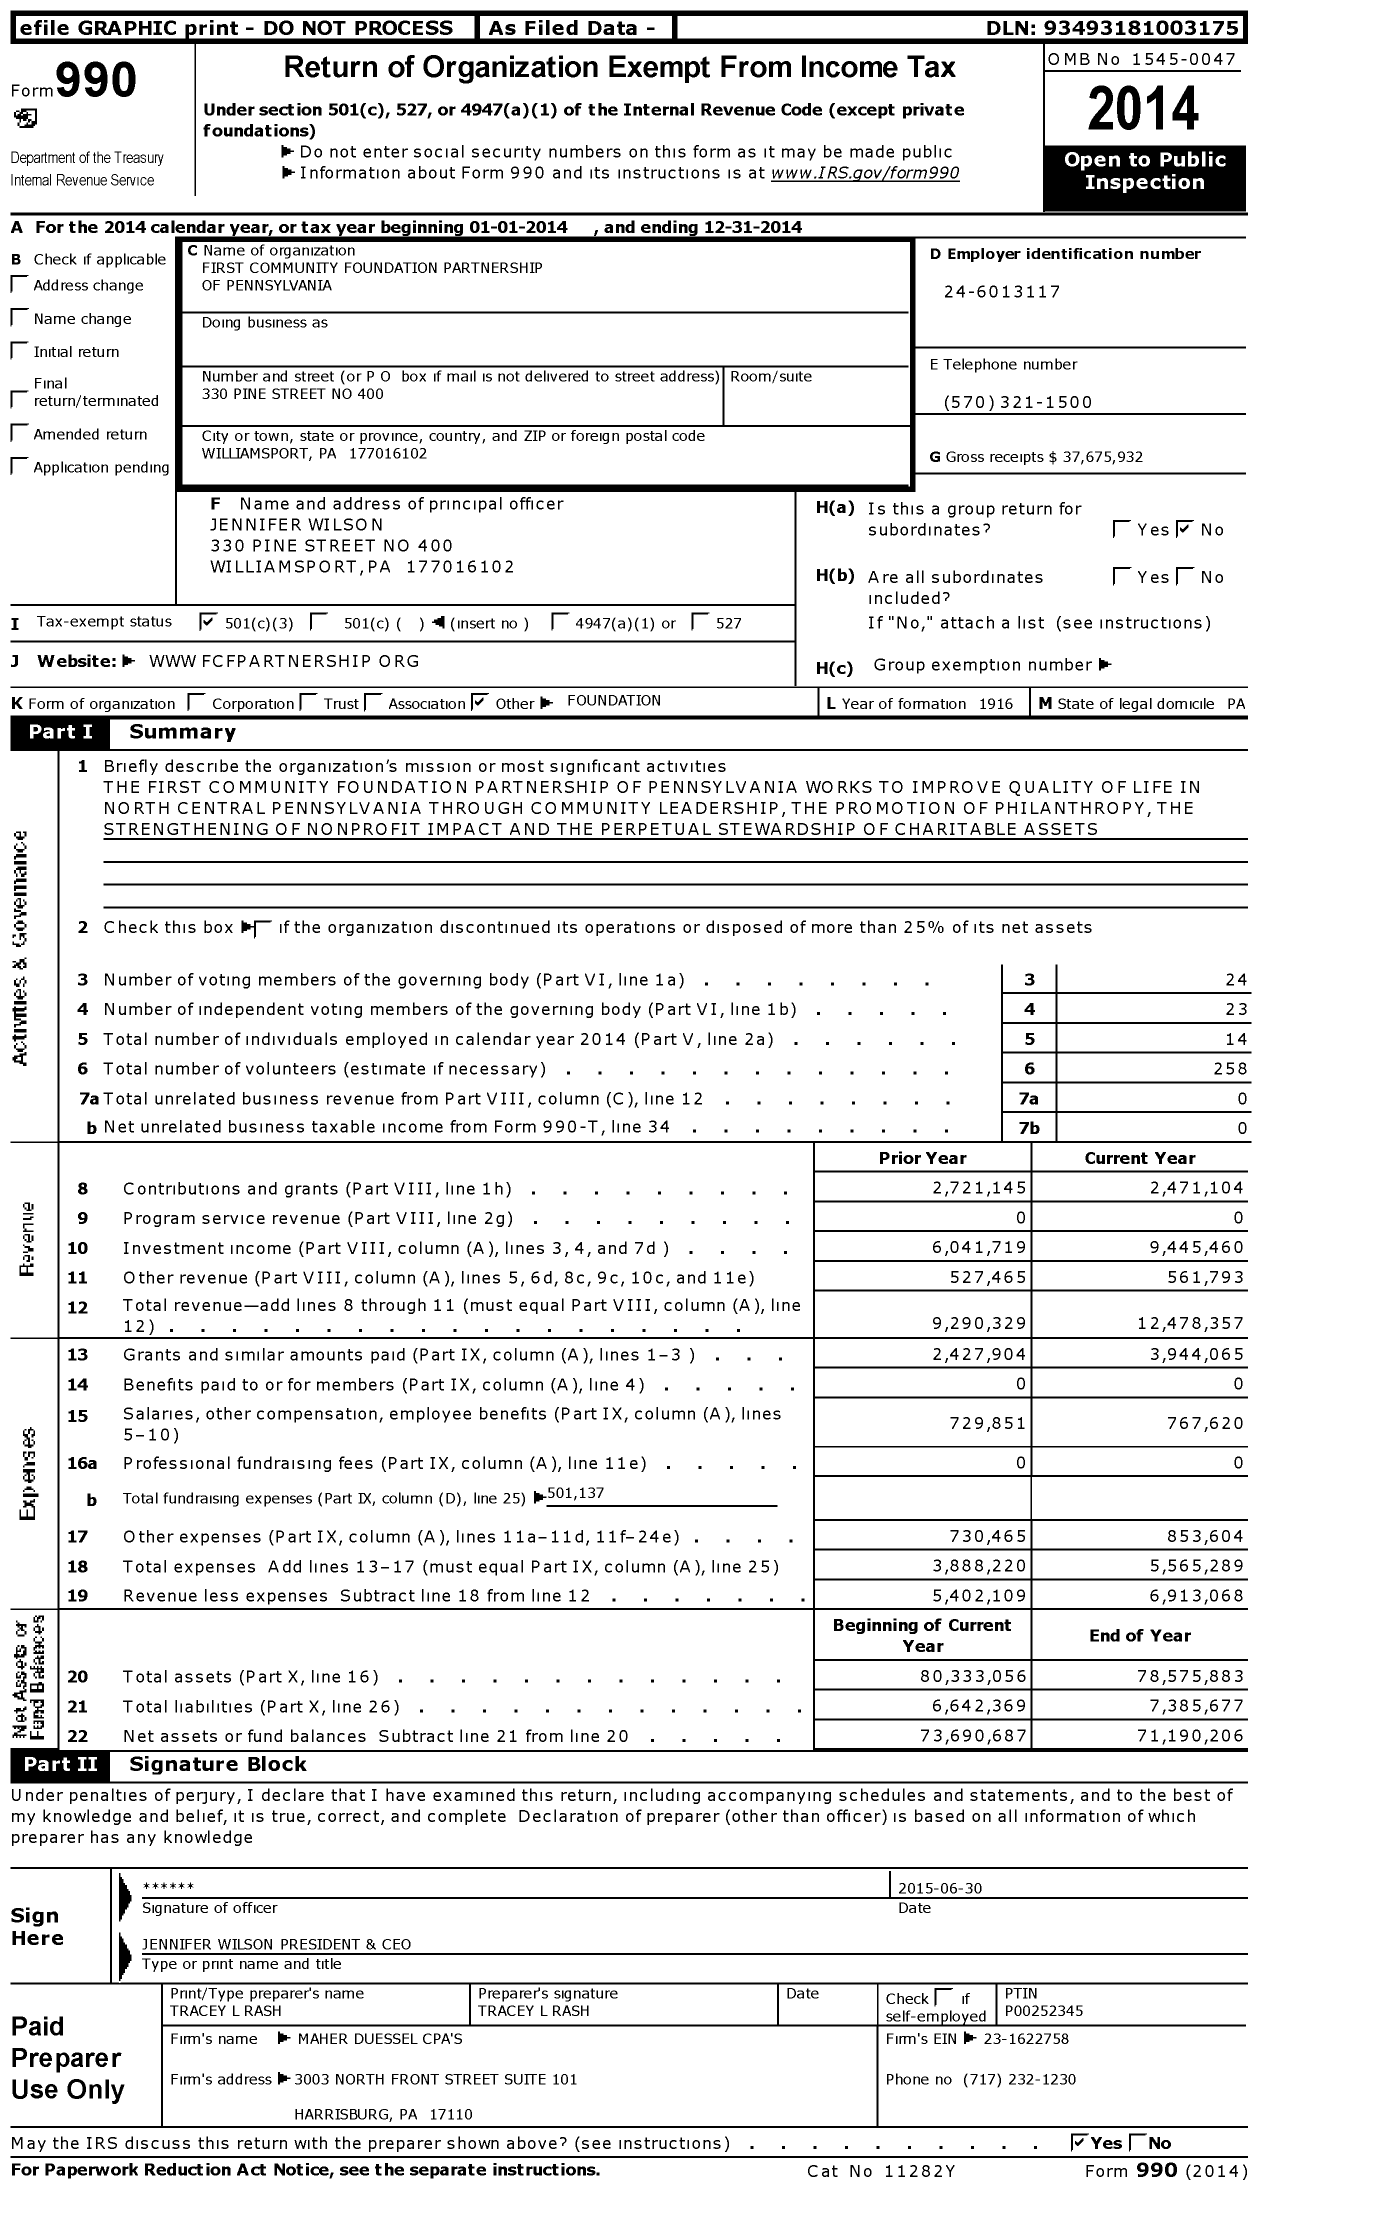 Image of first page of 2014 Form 990 for First Community Foundation Partnership of Pennsylvania (FCFP)